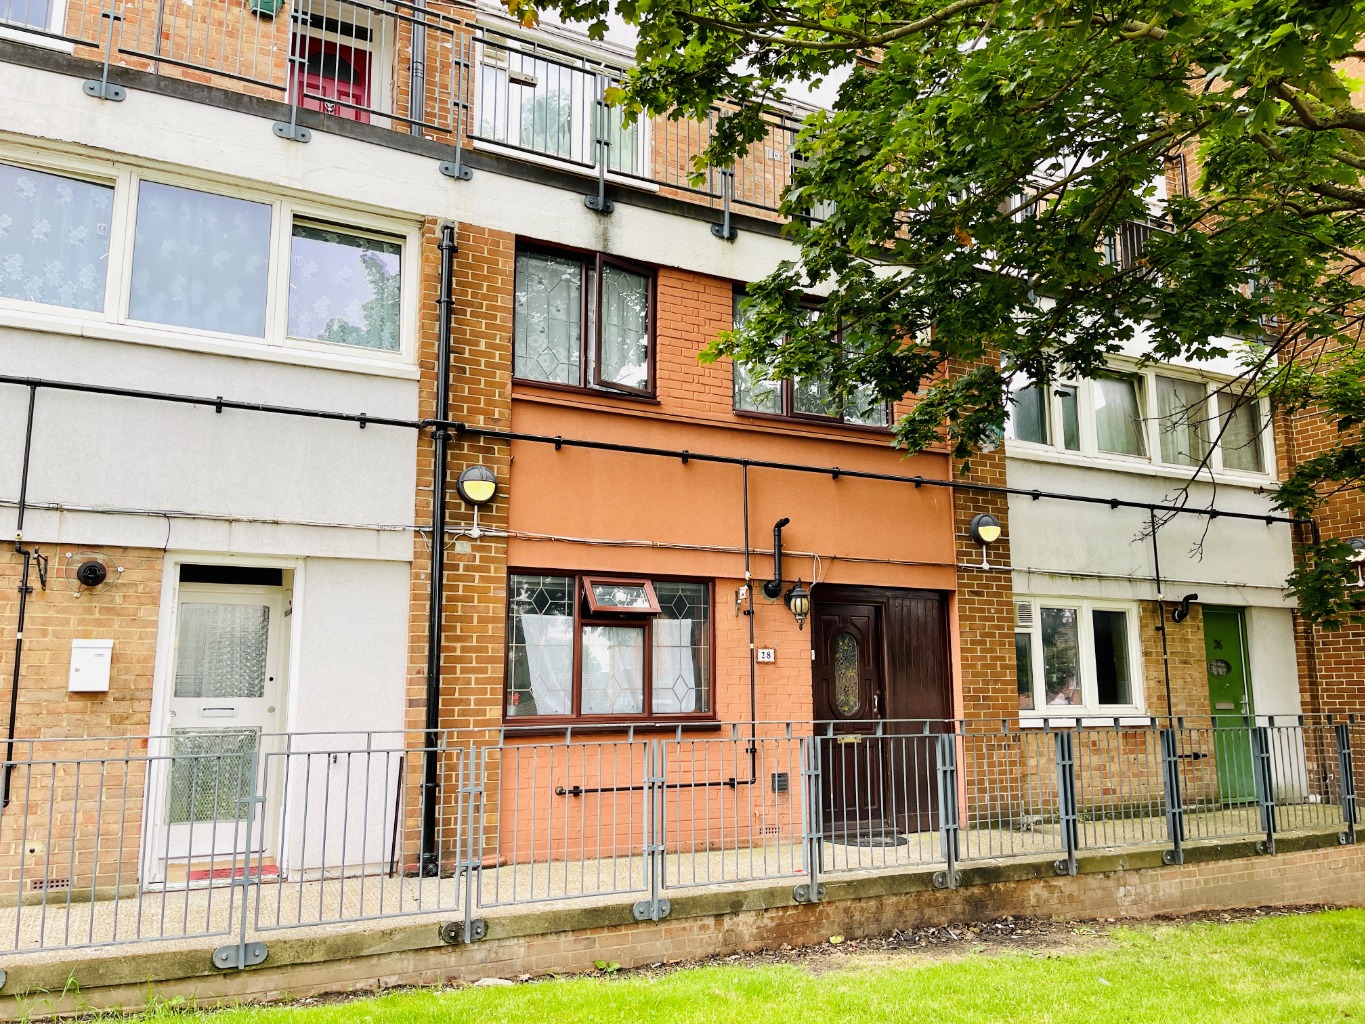 Situated under quarter of a mile from Plumstead mainline railway station and approximately half a mile from Woolwich DLR too,